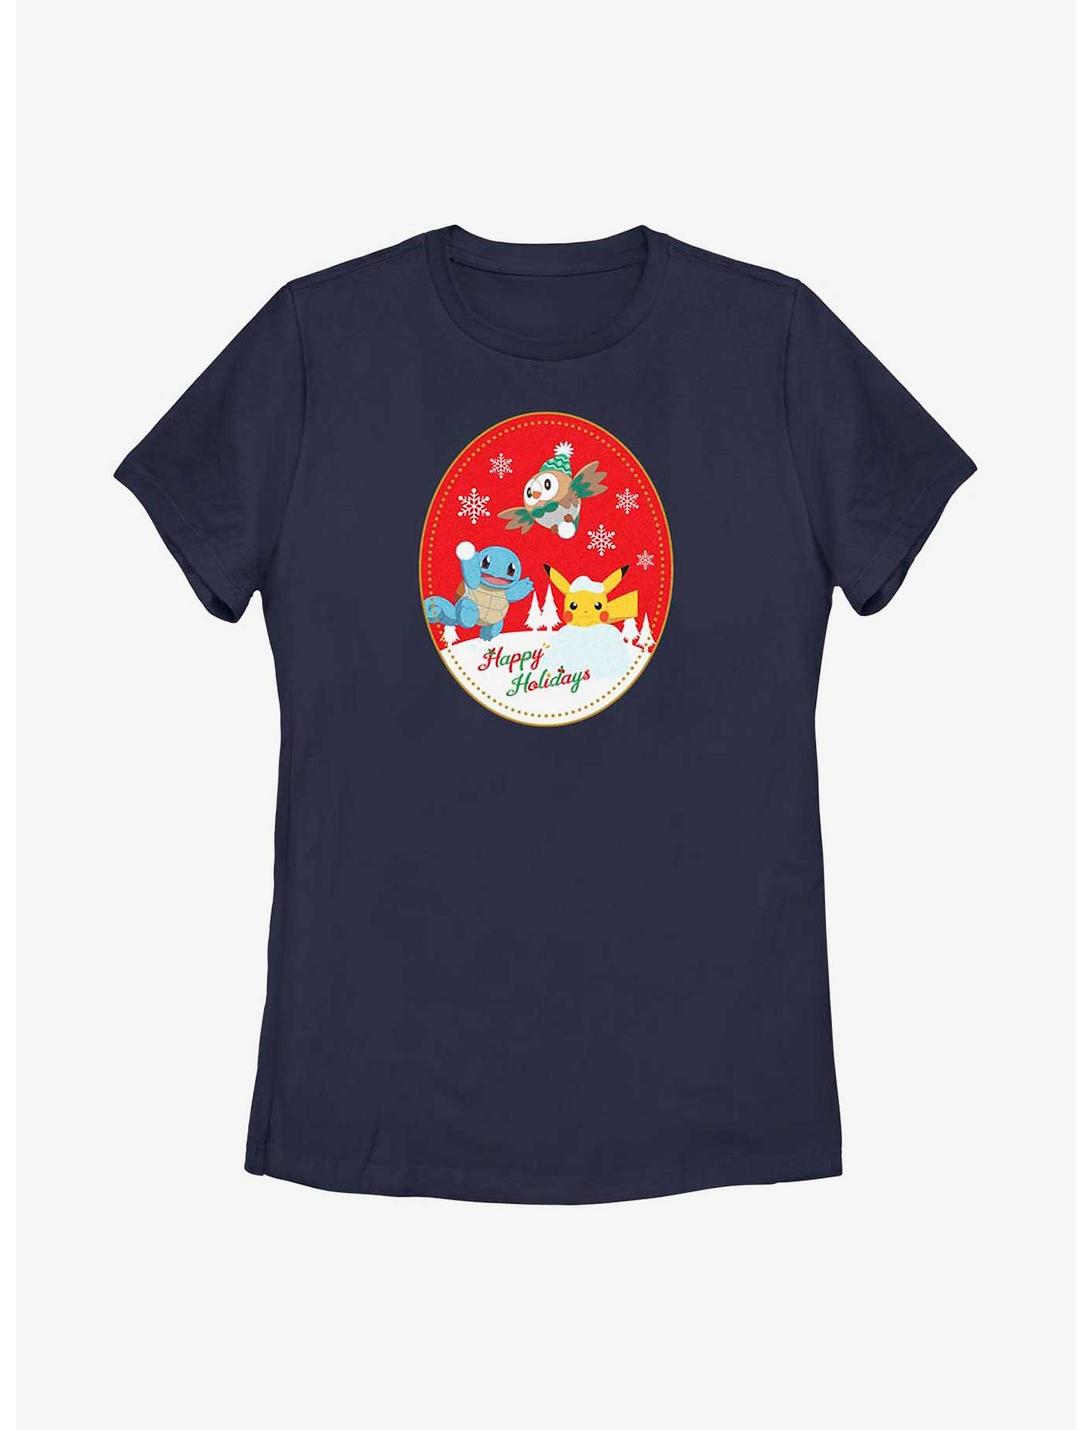 Pokémon Holiday Badge Squirtle, Rowlet And Pikachu Womens T-Shirt, NAVY, hi-res